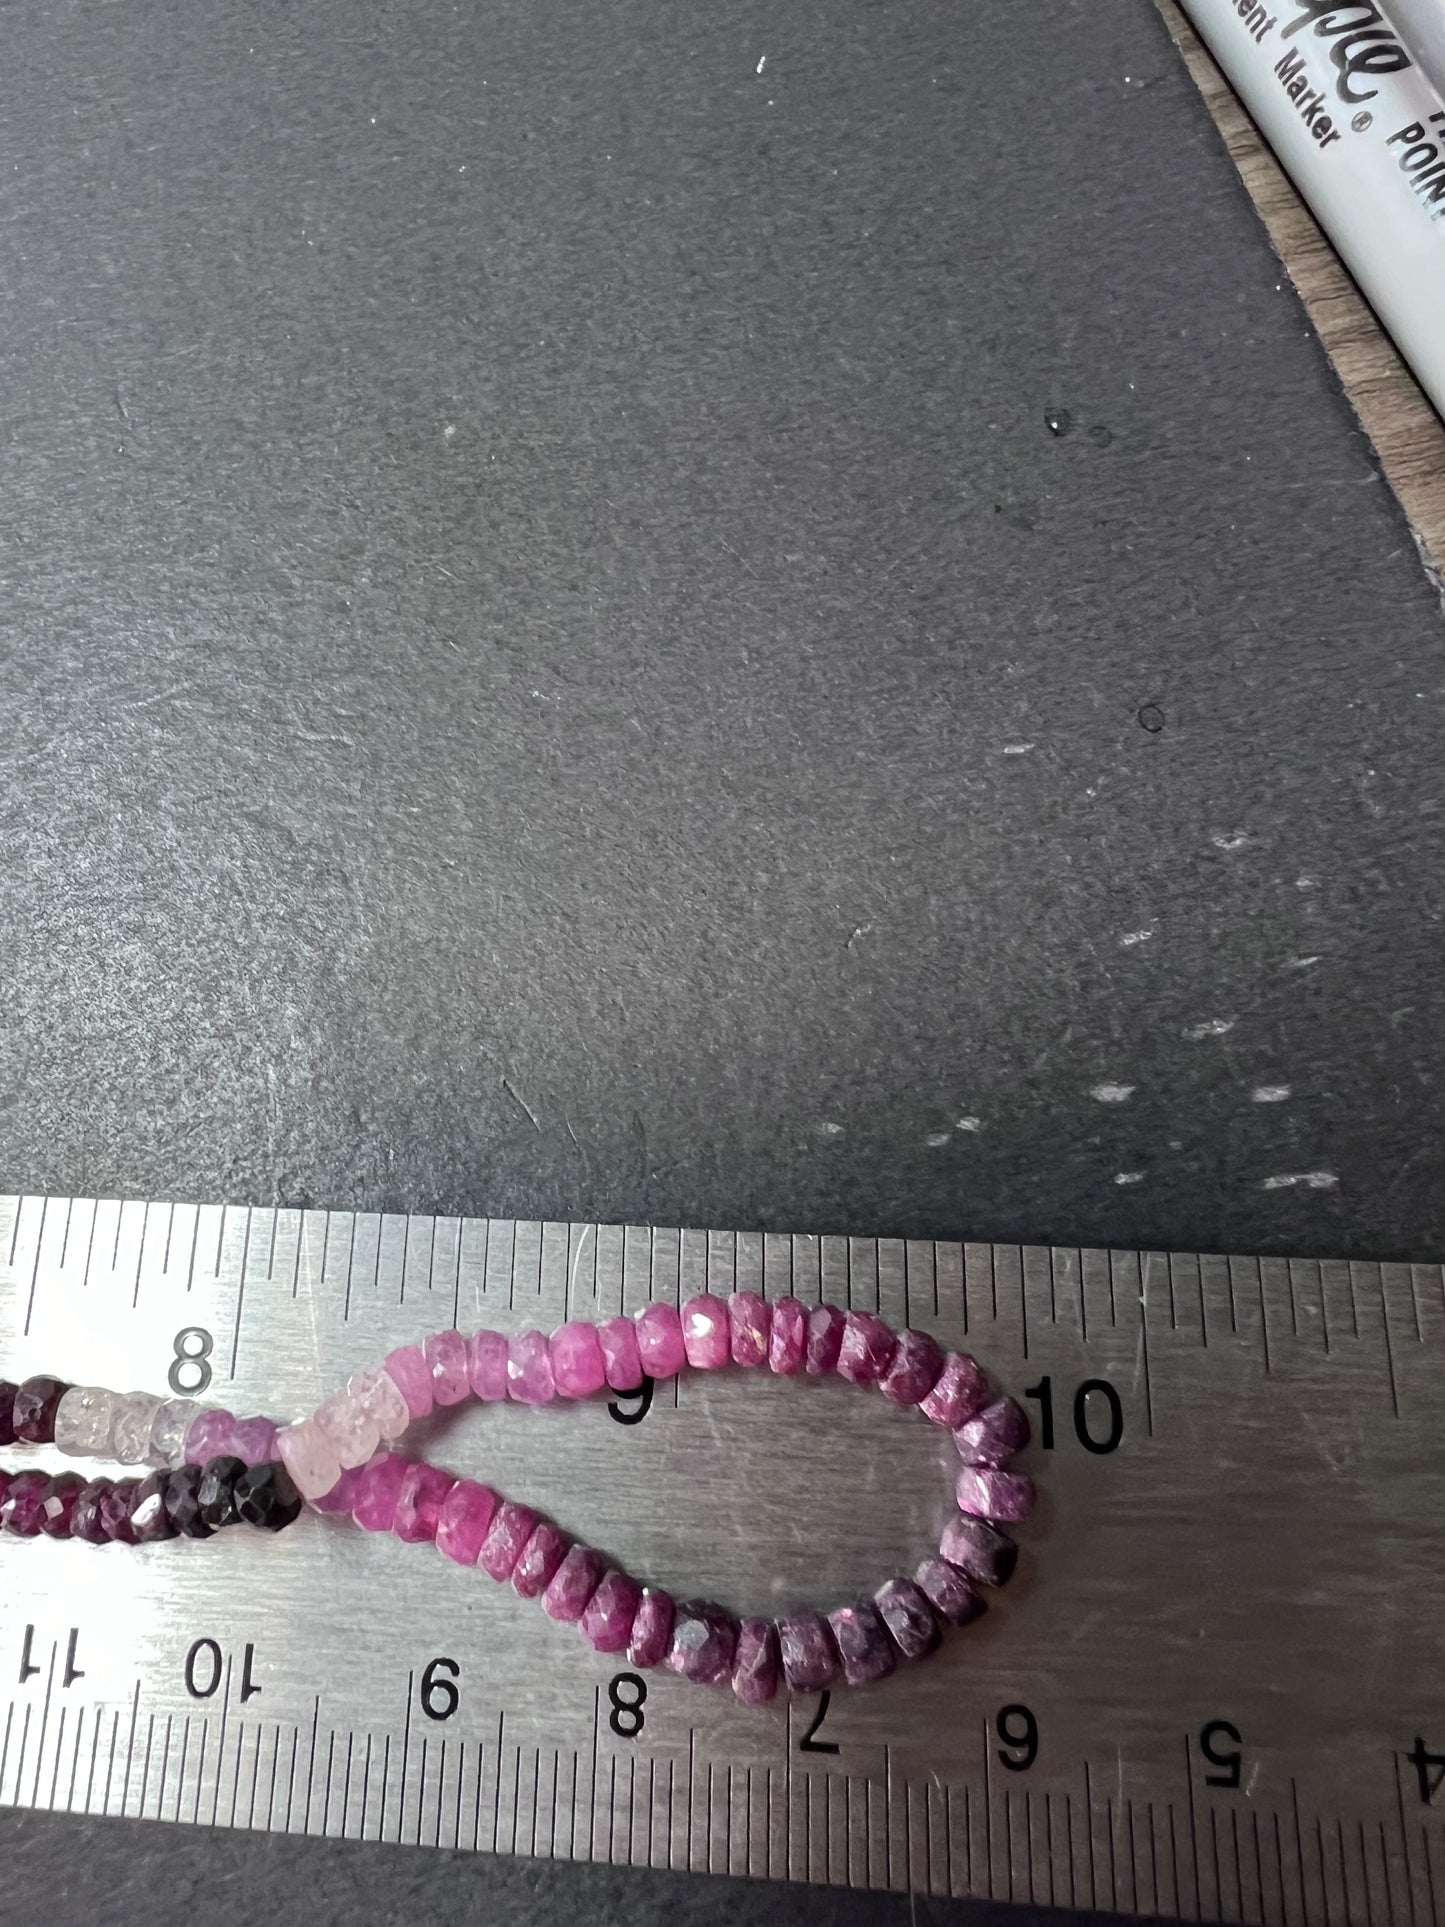 *NEW* Pink sapphire graduated faceted 20 inch necklace with sterling clasp.